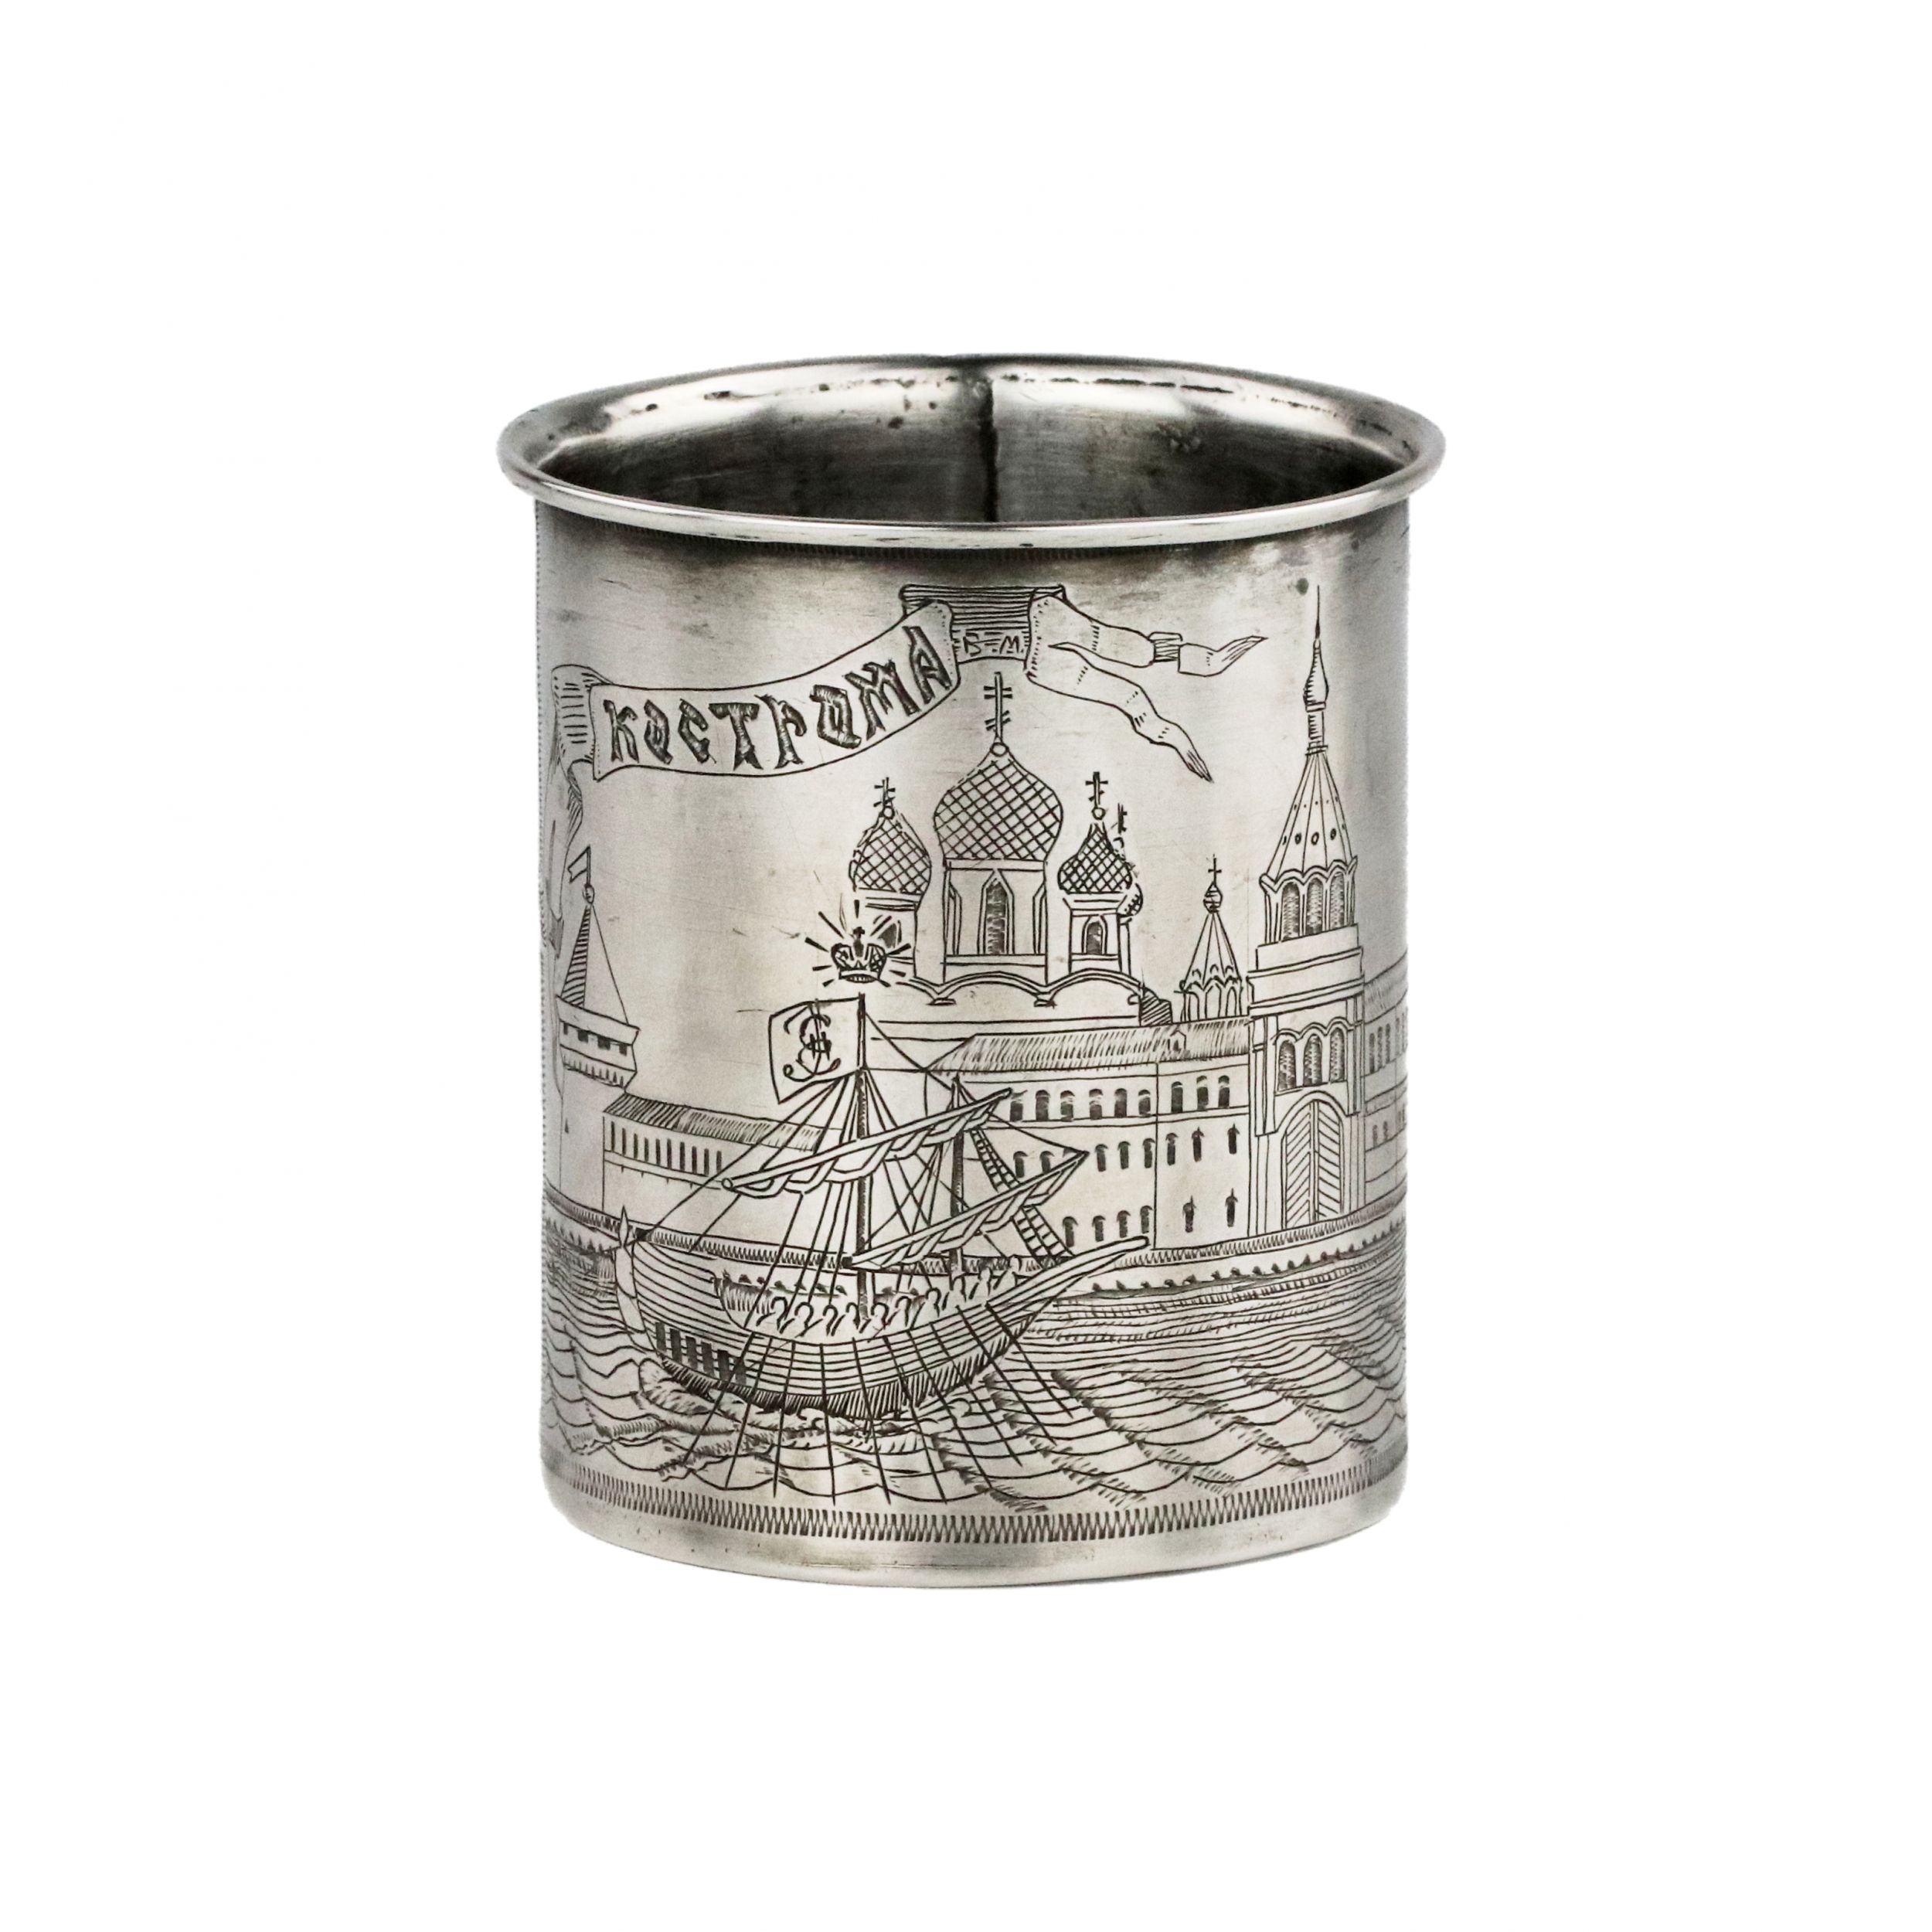 Memorial-silver-vodka-cup-in-honor-of-the-arrival-of-Catherine-II-in-Kostroma-in-1767-